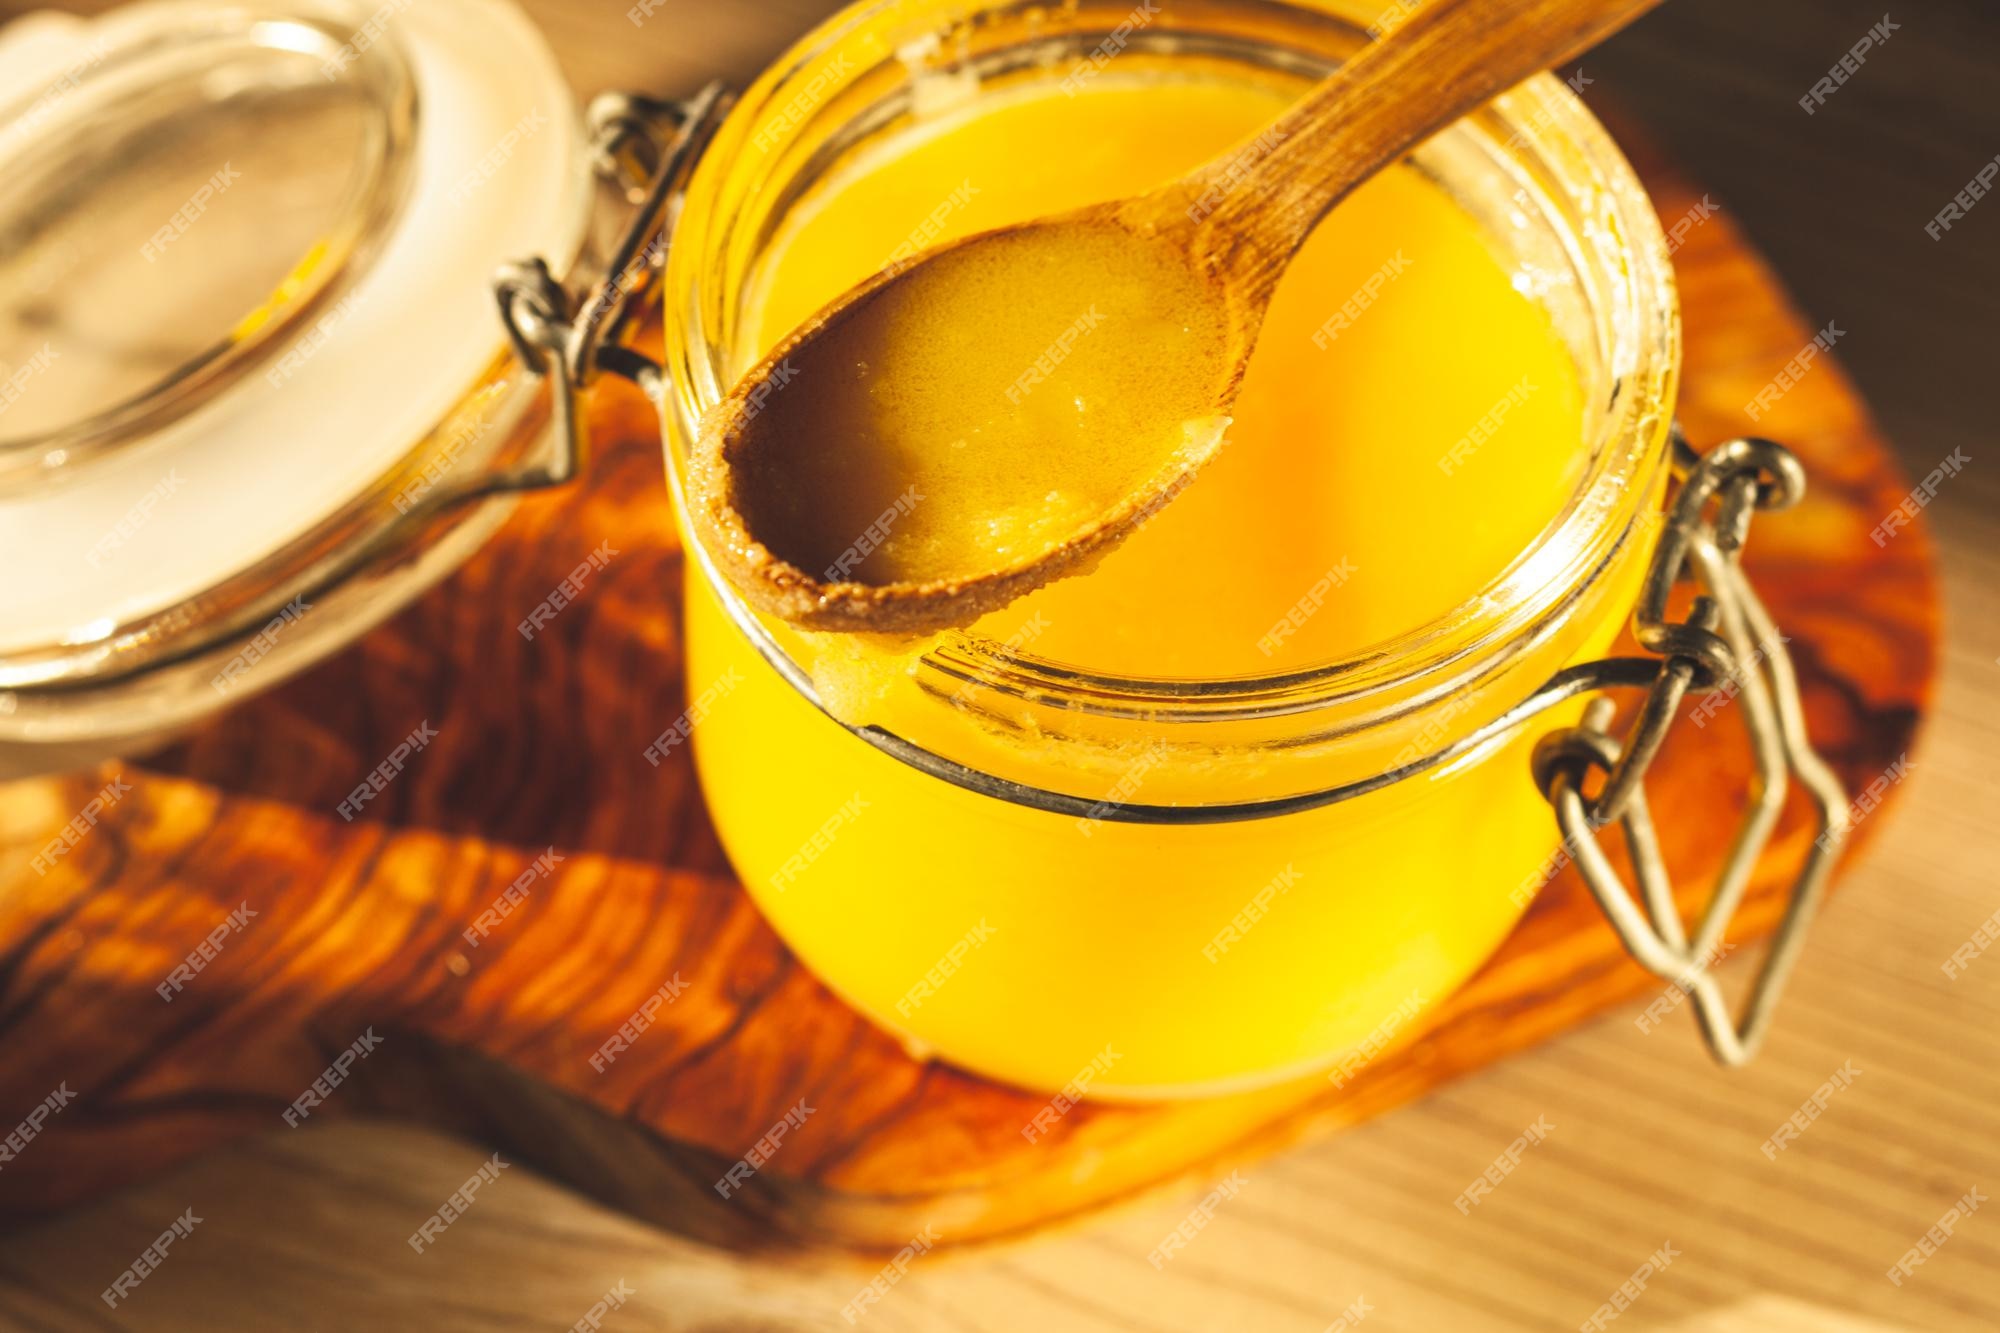 Premium Photo | Wooden spoon with ghee - clarified butter in the glass ...